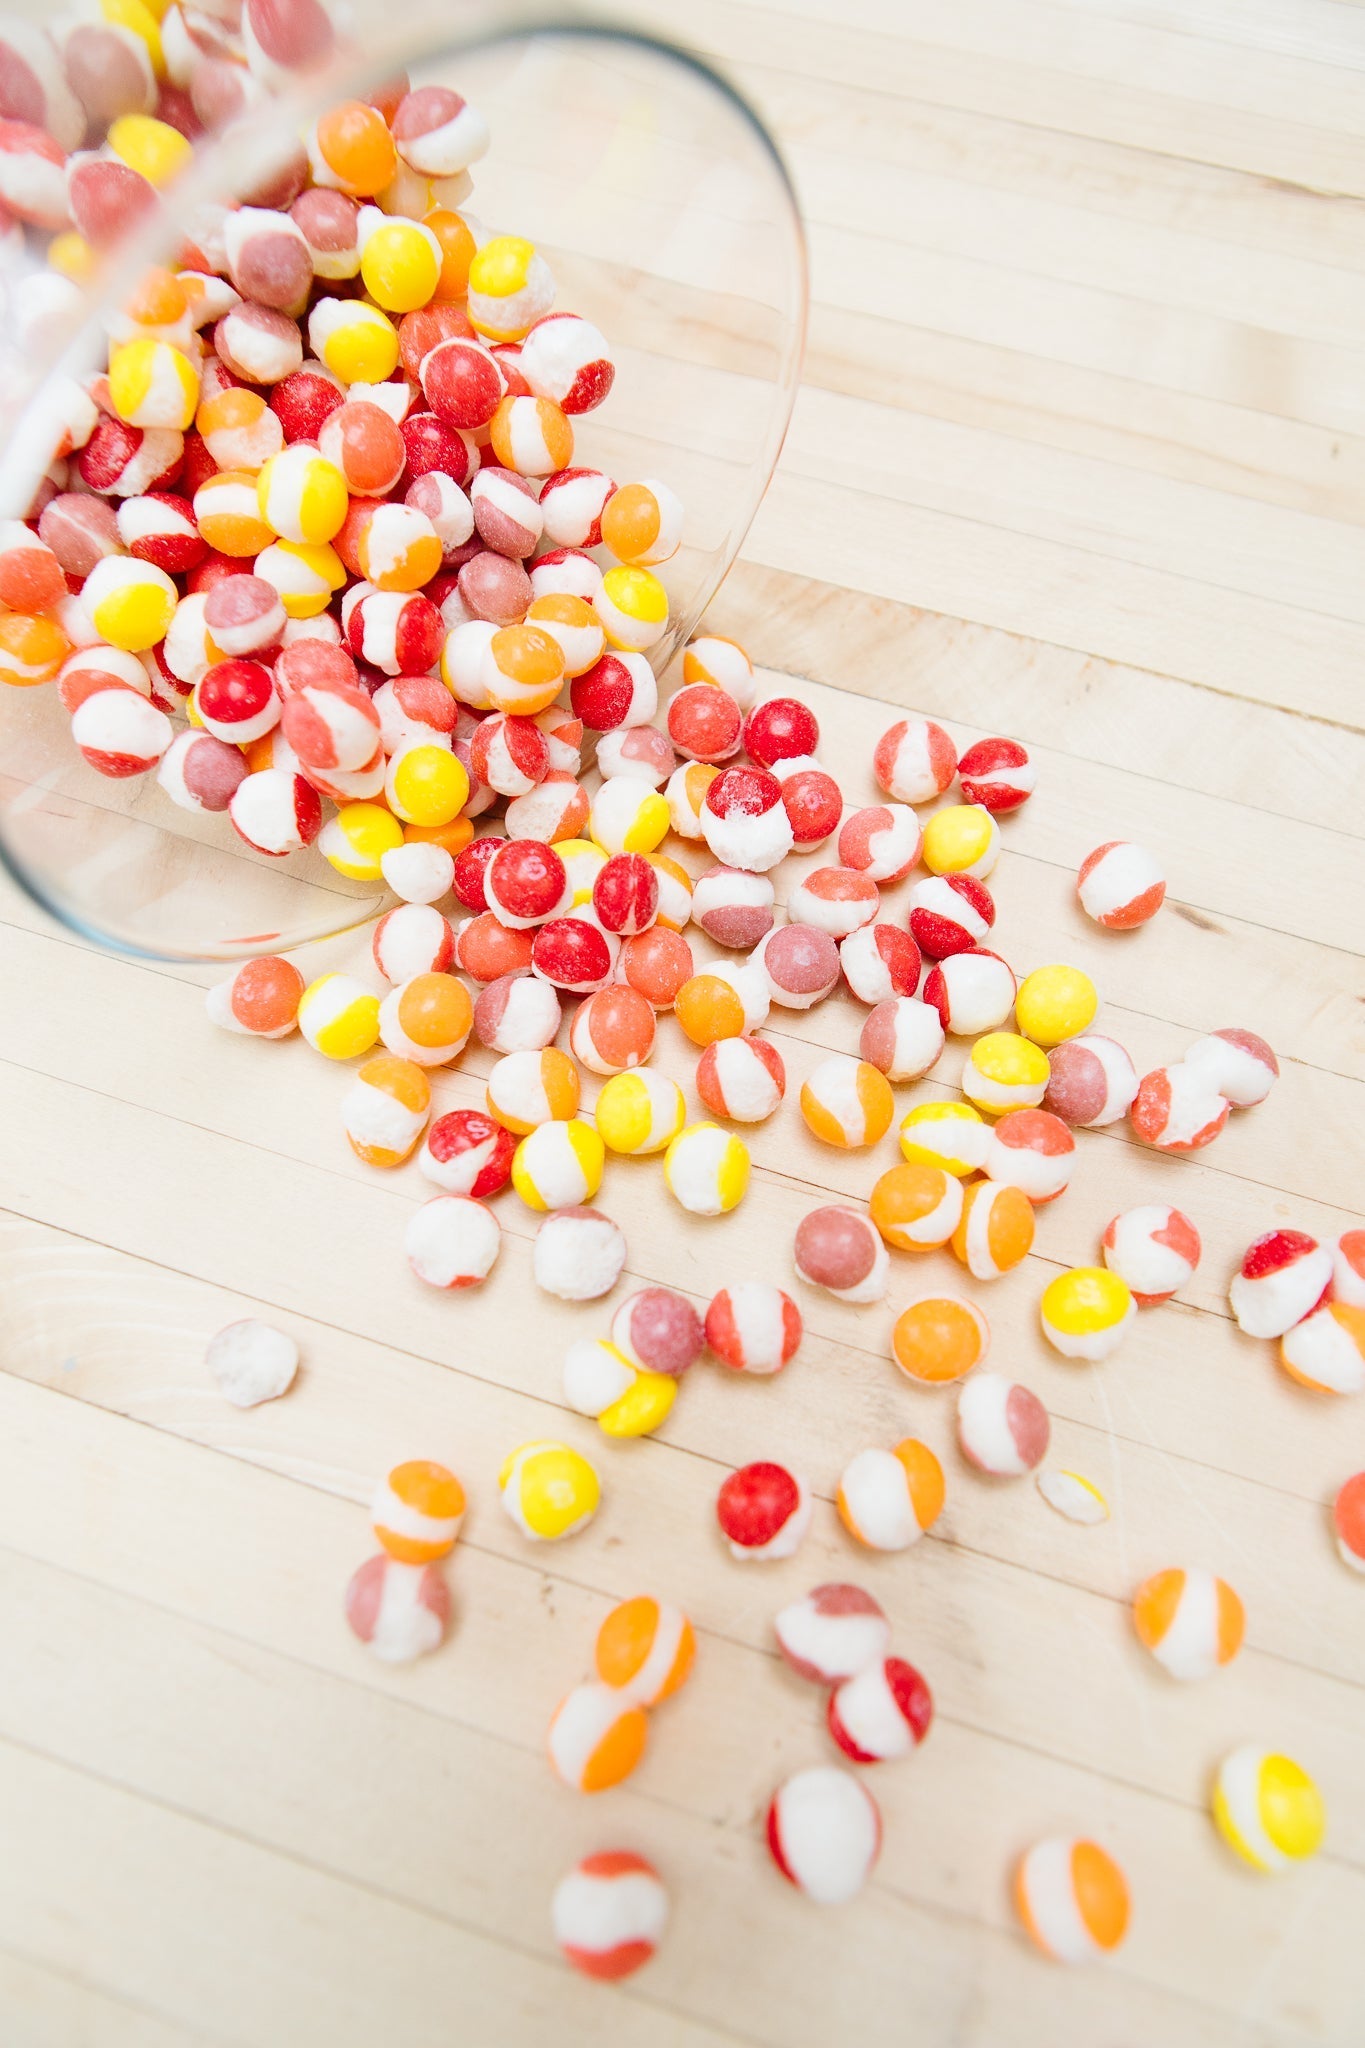 Freeze Dried Skittles 6 Oz (Online Exclusive)